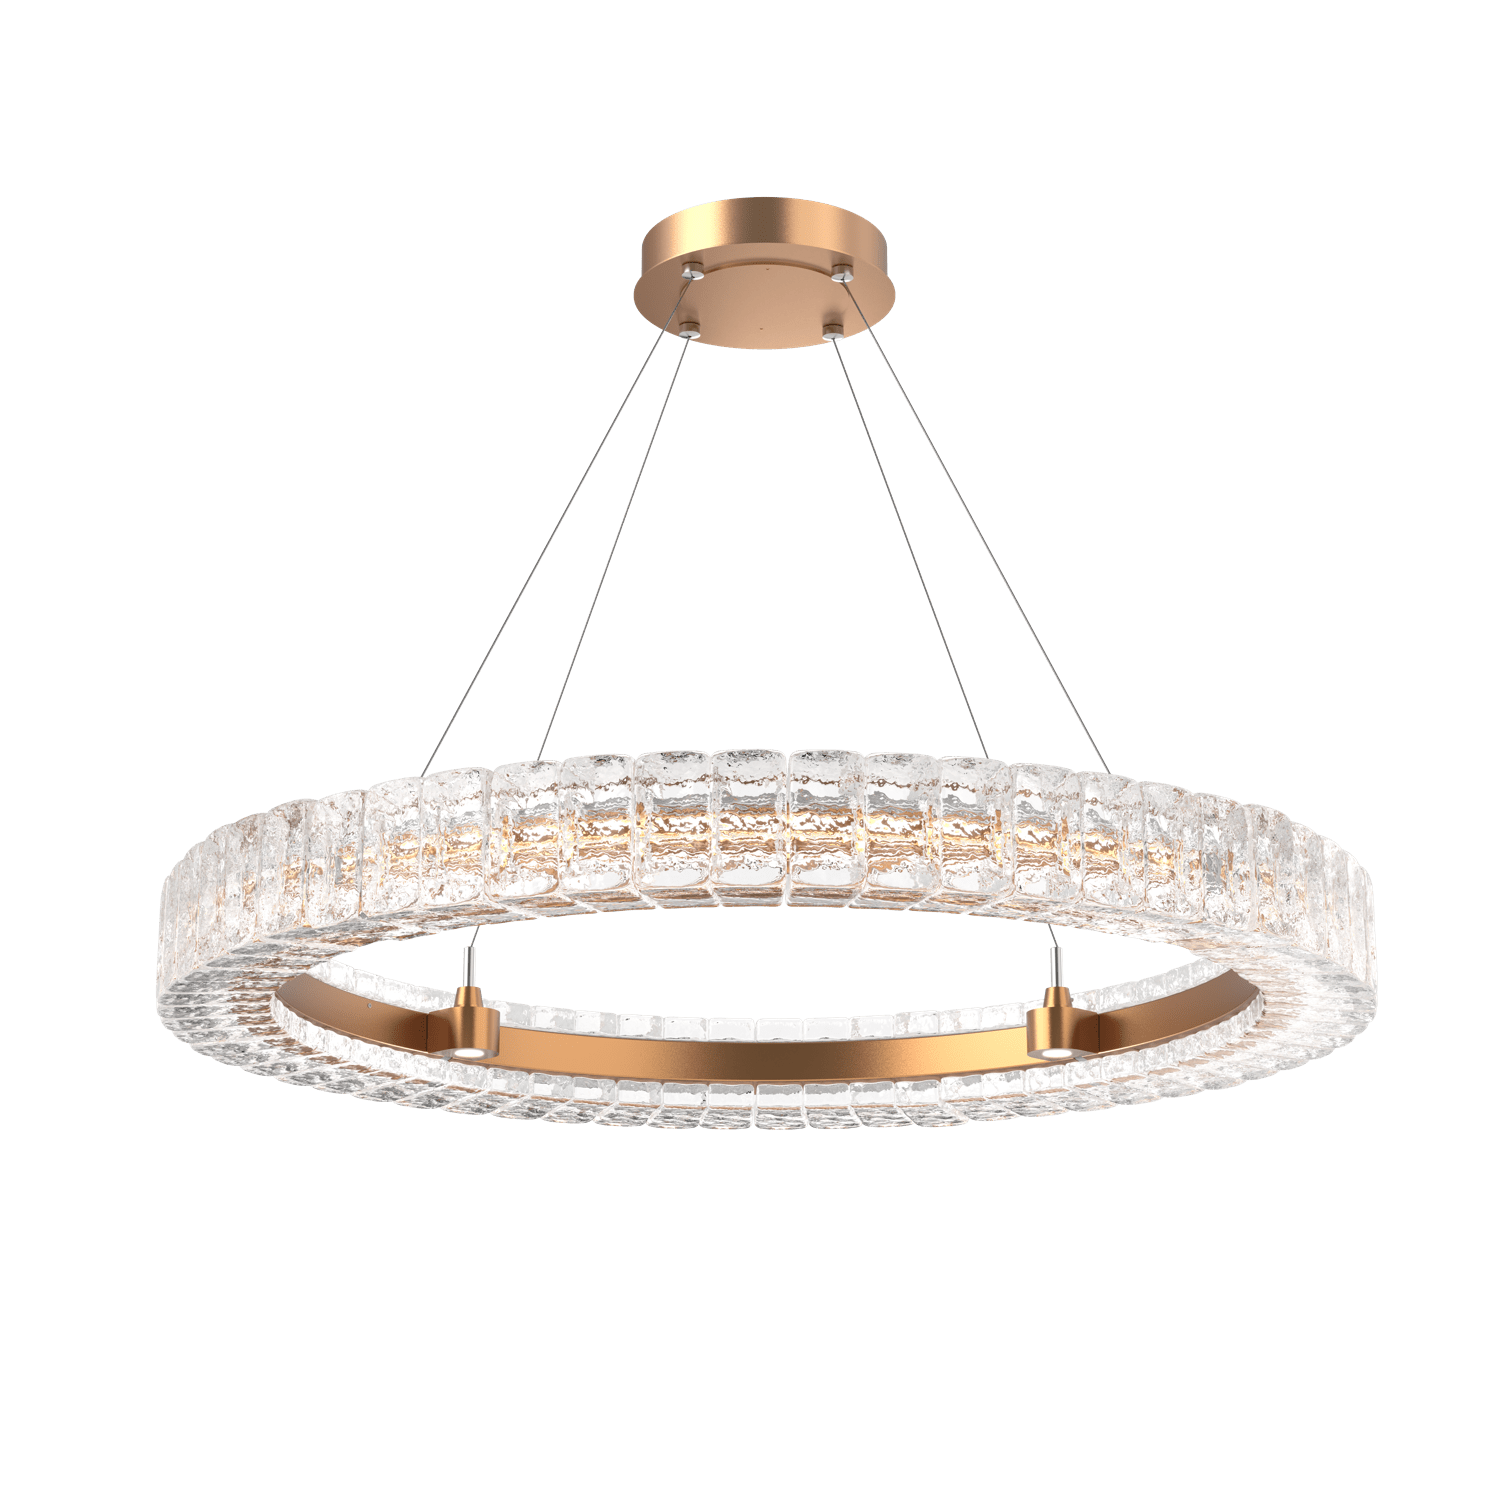 CHB0080-36-NB-Hammerton-Studio-Asscher-36-inch-ring-chandelier-with-novel-brass-finish-and-clear-cast-glass-shades-and-LED-lamping